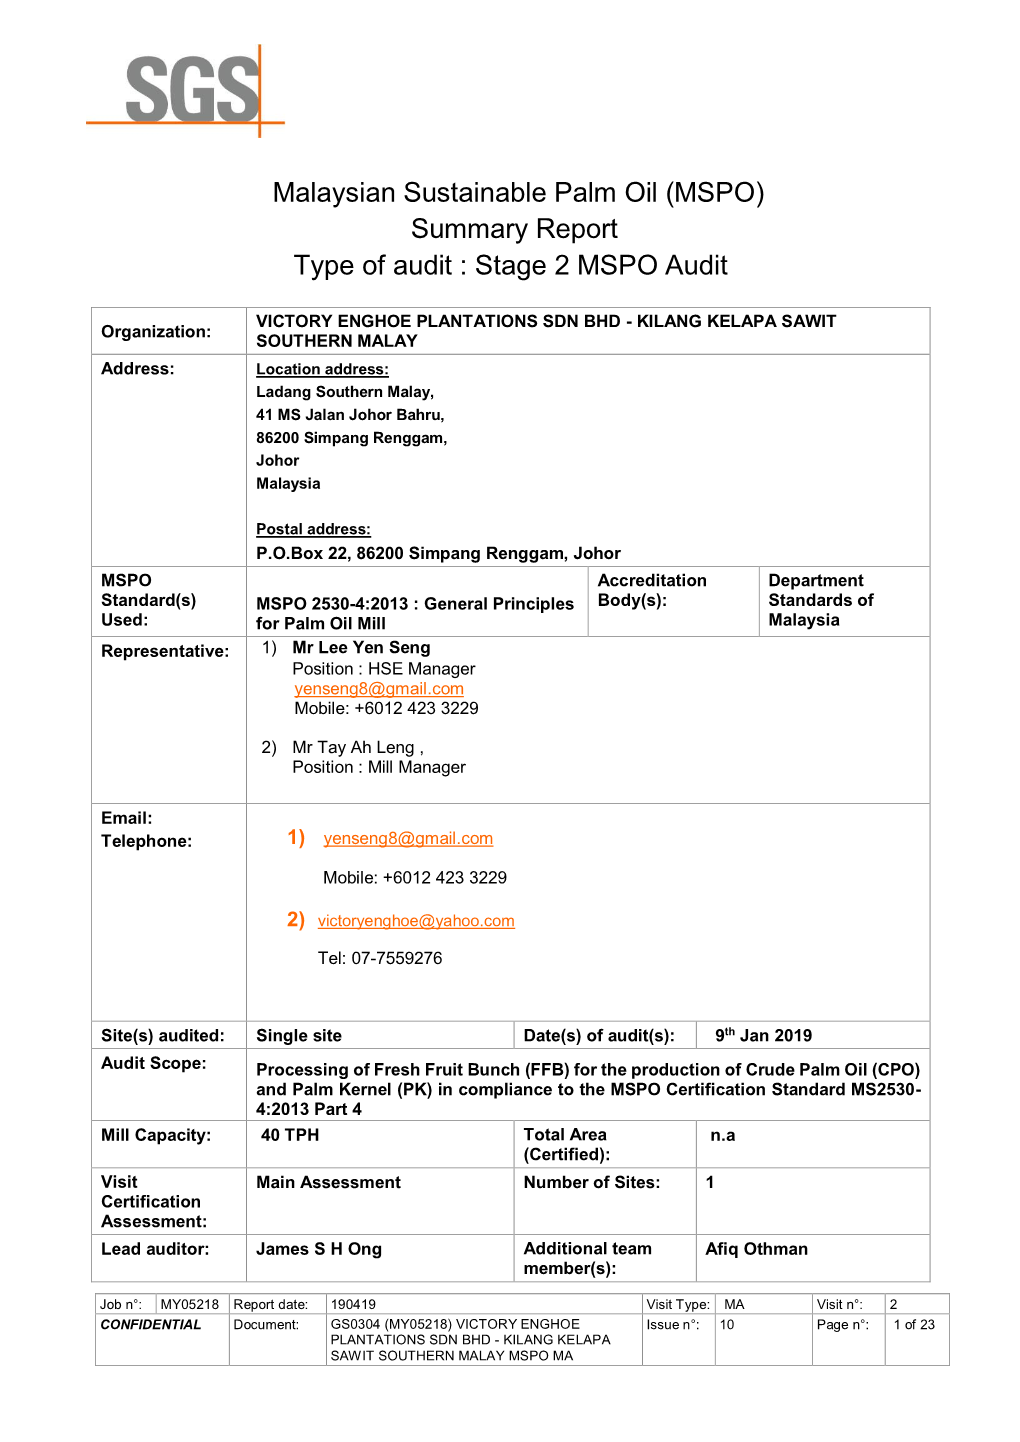 Malaysian Sustainable Palm Oil (MSPO) Summary Report Type of Audit : Stage 2 MSPO Audit